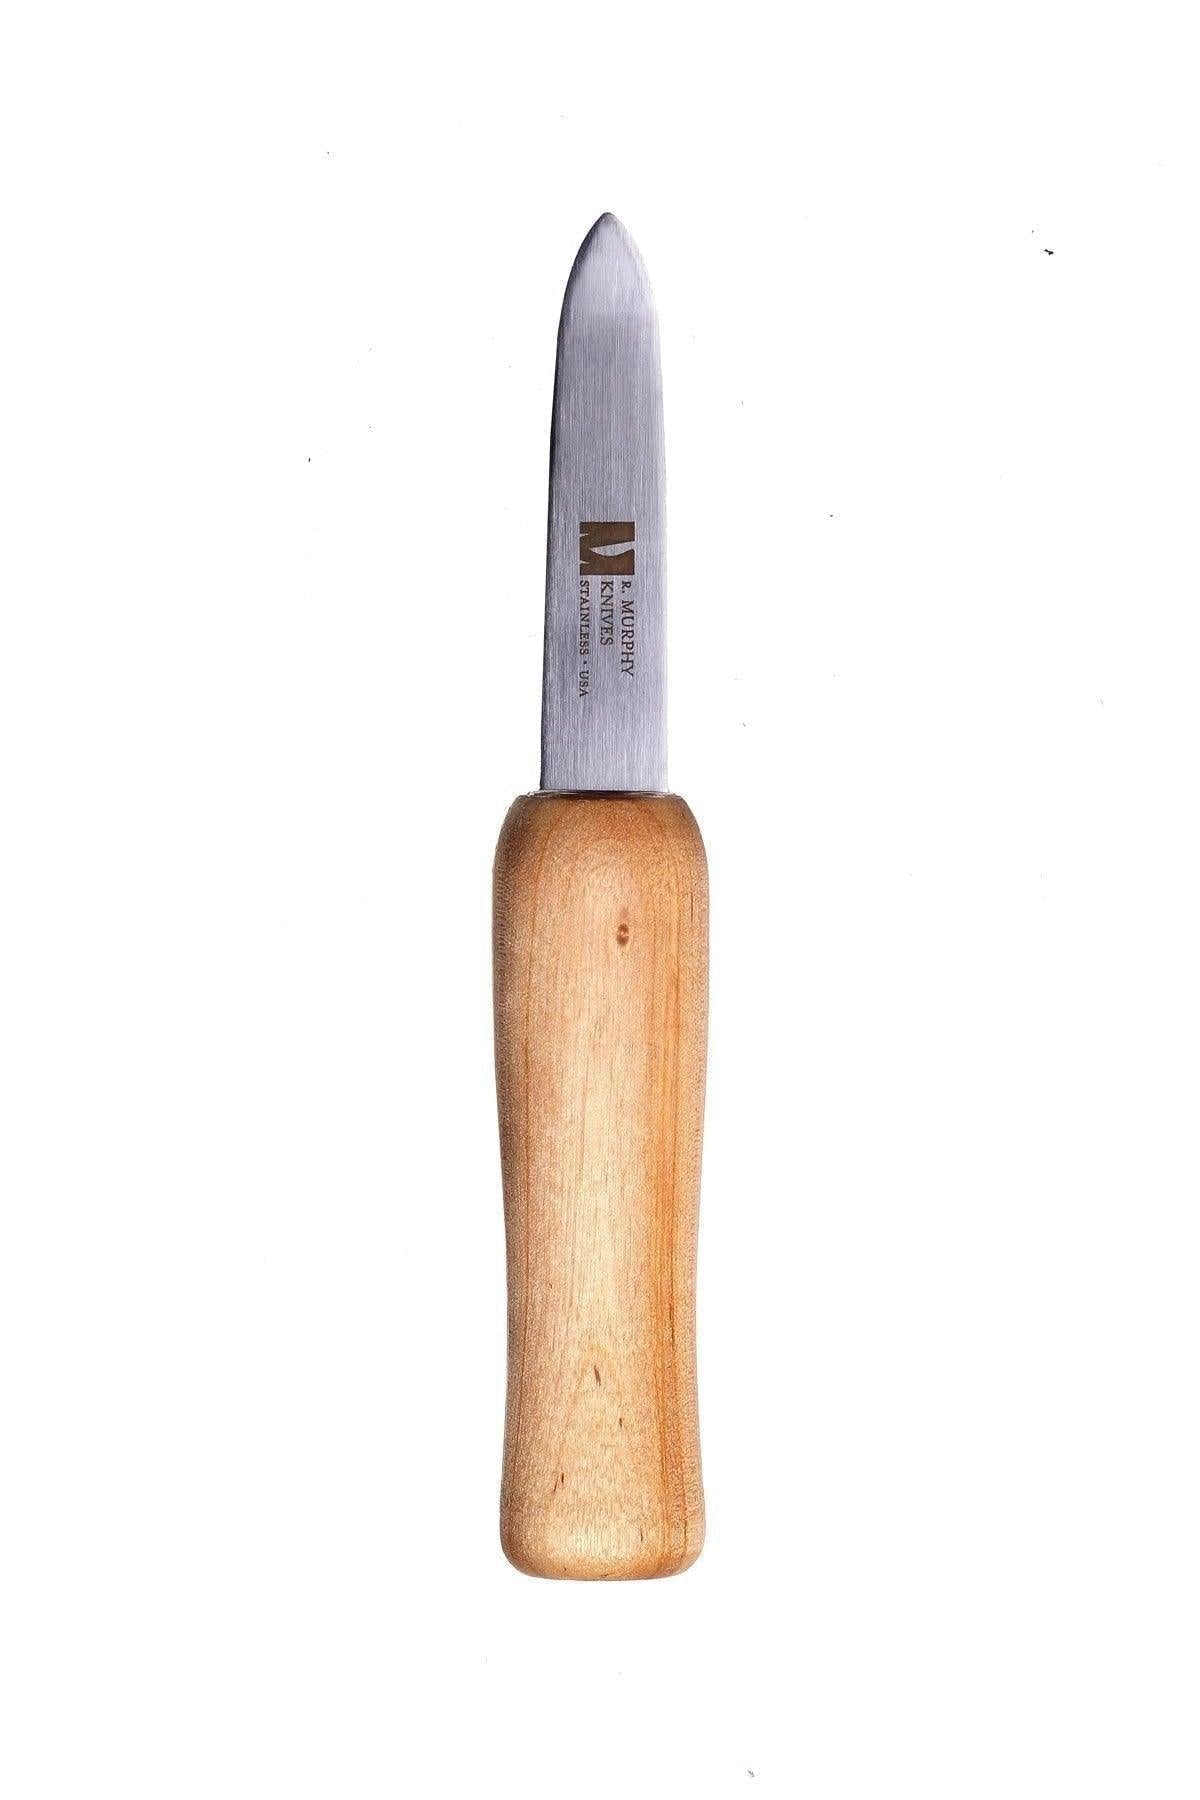 R Murphy New Haven Oyster, Wood Handle-Cooking Tool-R Murphy-Carbon Knife Co